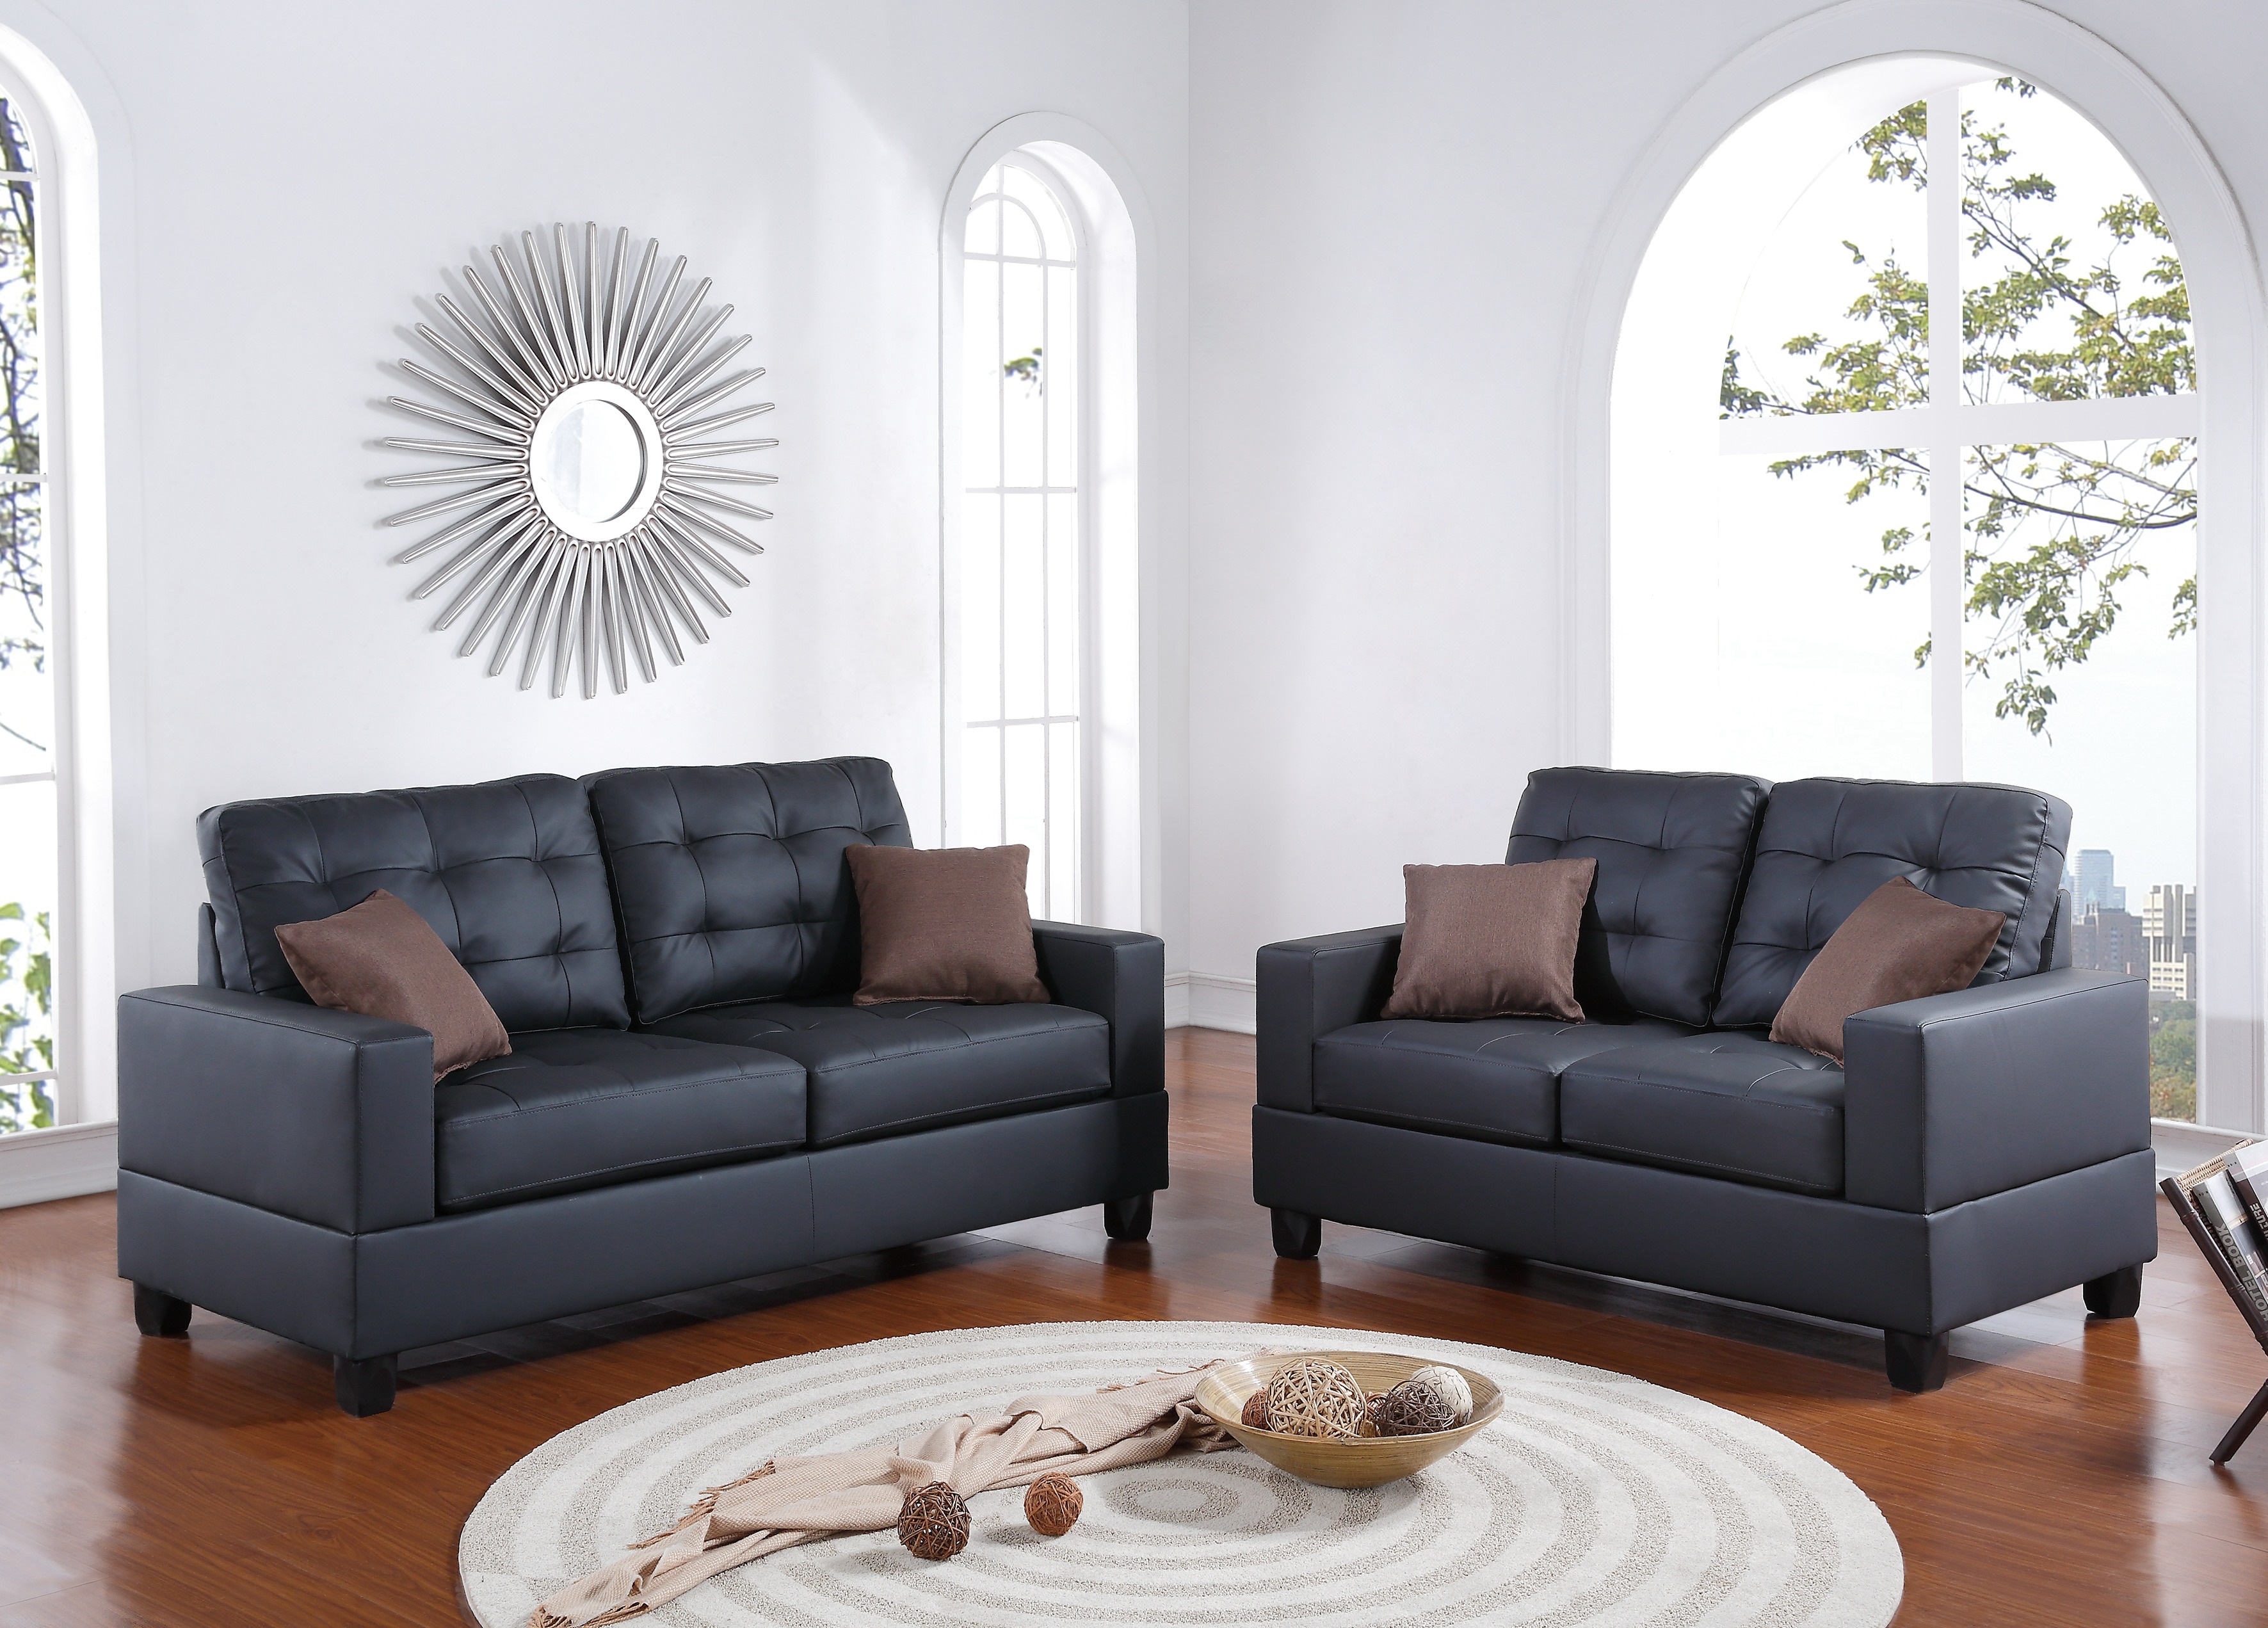 Loveseat Tufted Cushion Couch Living Room, Faux Leather Couch Set